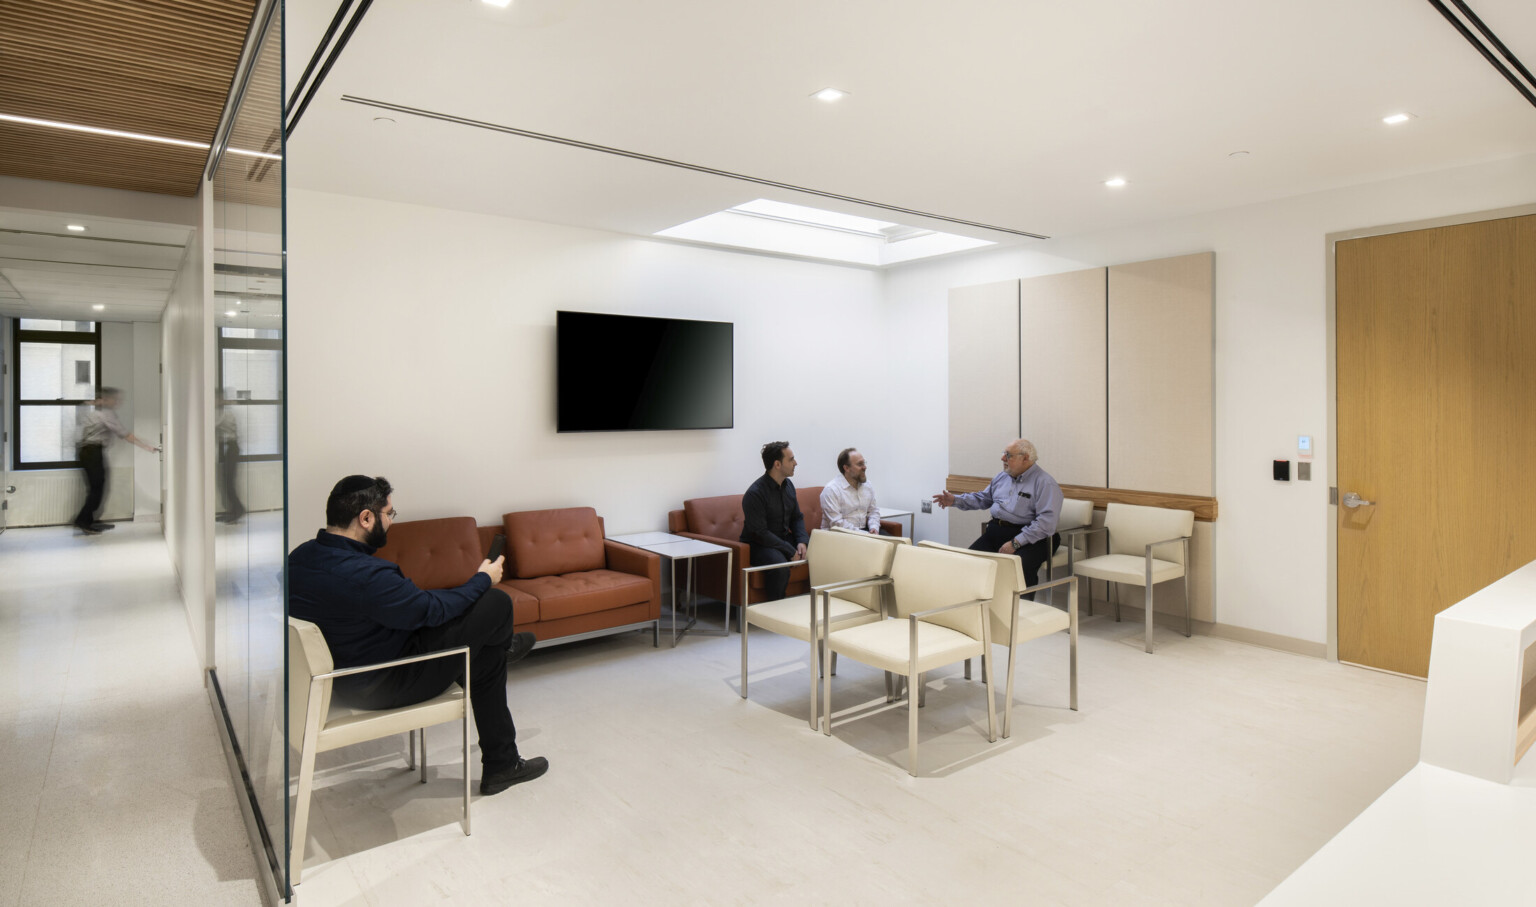 waiting room with a warm and restrained material palette with terracotta and white oak wood accents helps to reduce anxiety, a skylight brings natural light indoors, beige carpet, cream colored walls and ceiling lend a soothing sense of calm for patients